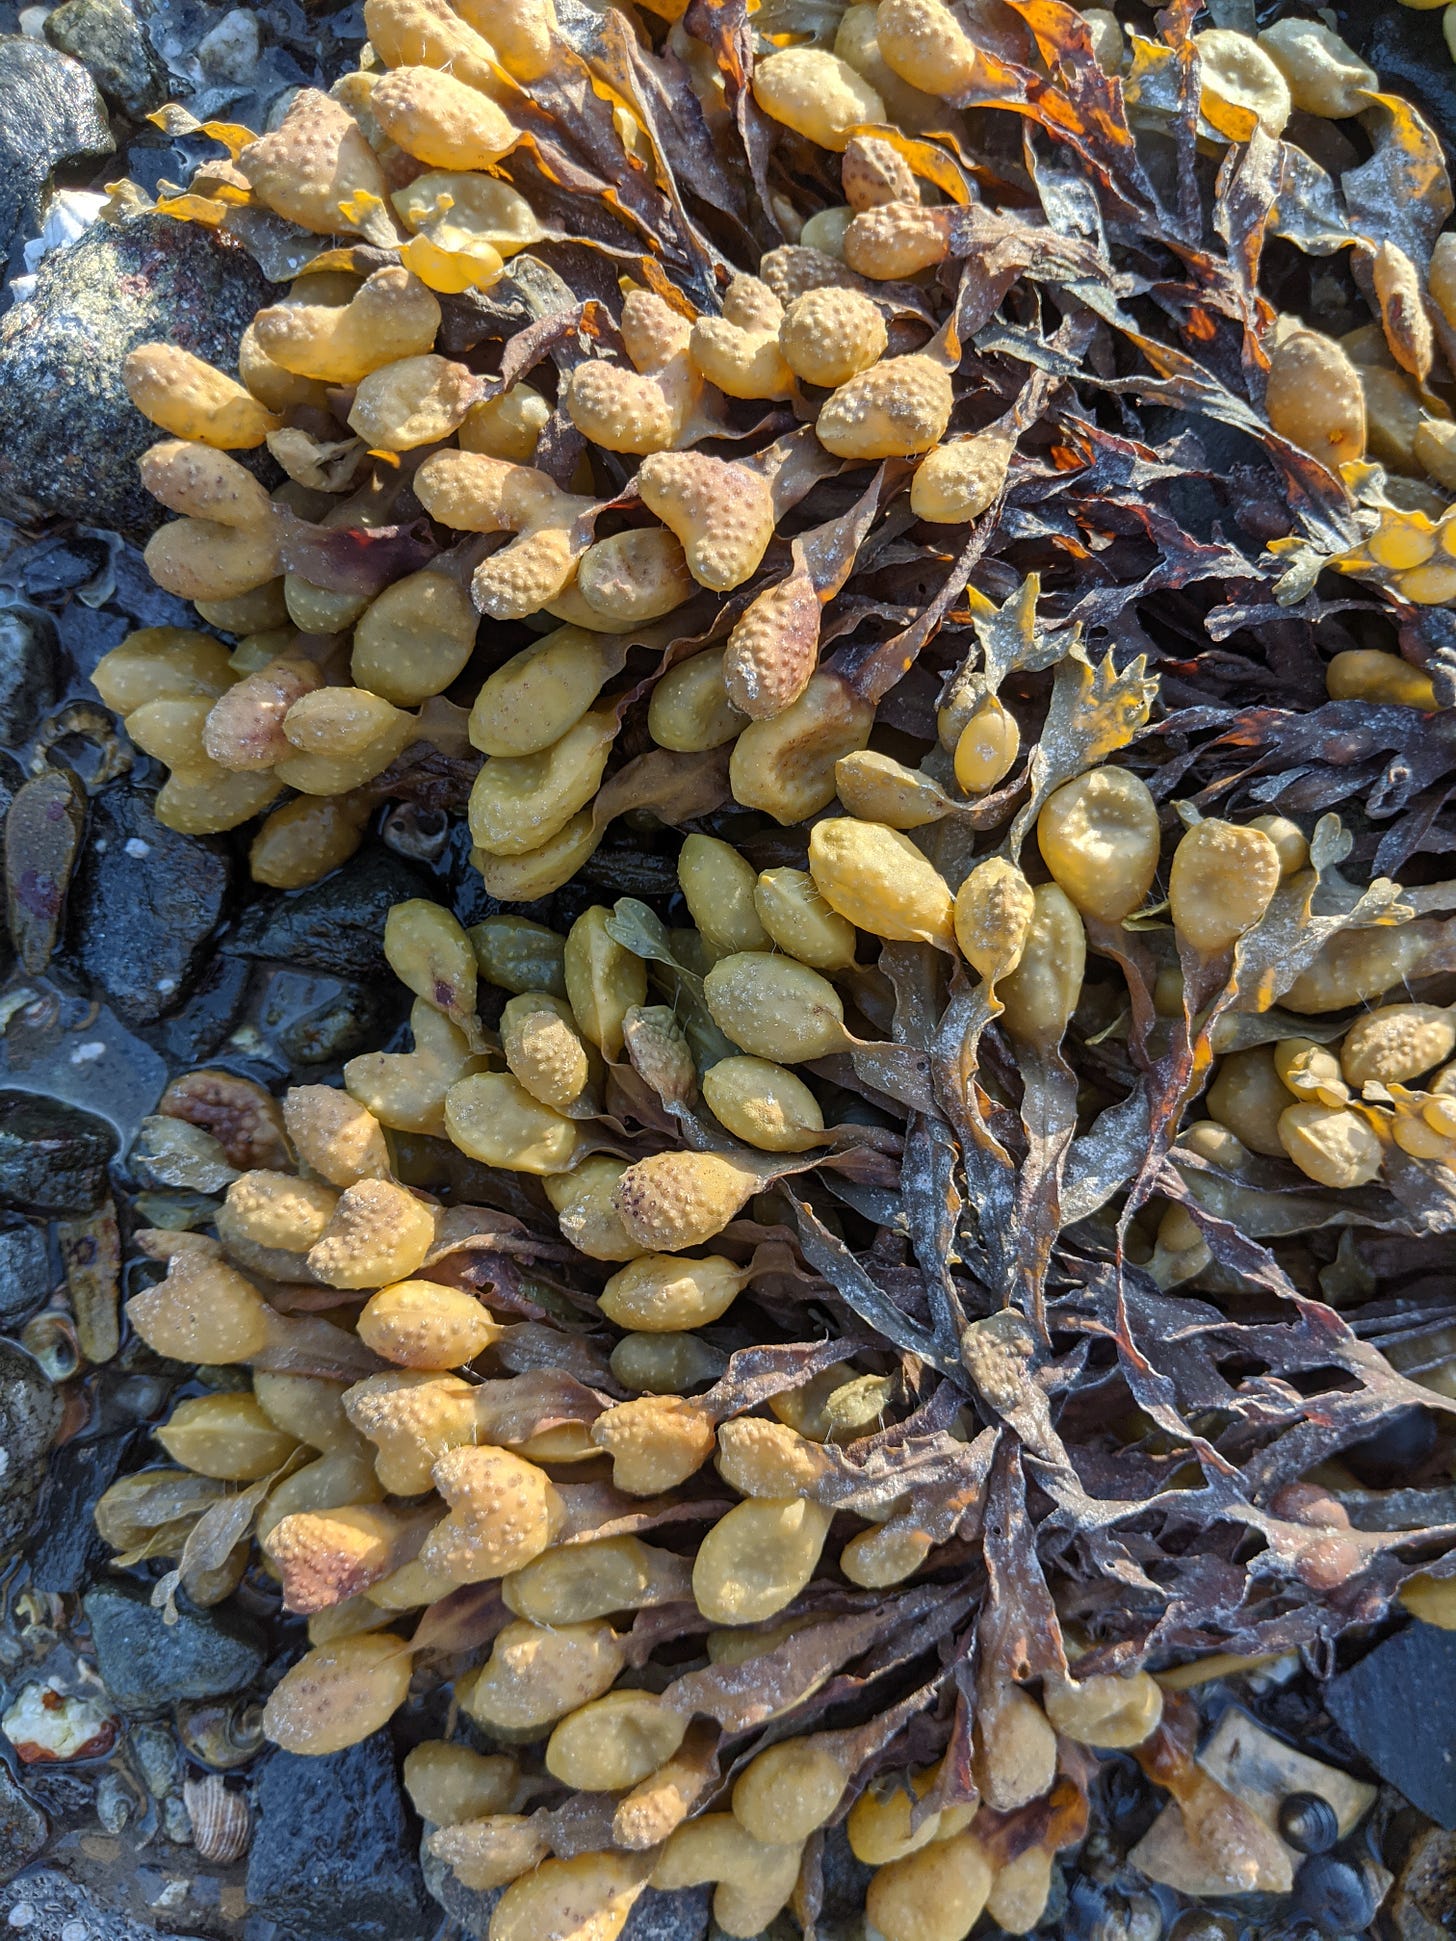 A zoomed-in photo of a yellow-green seaweed with large bulb-like pockets at the end.